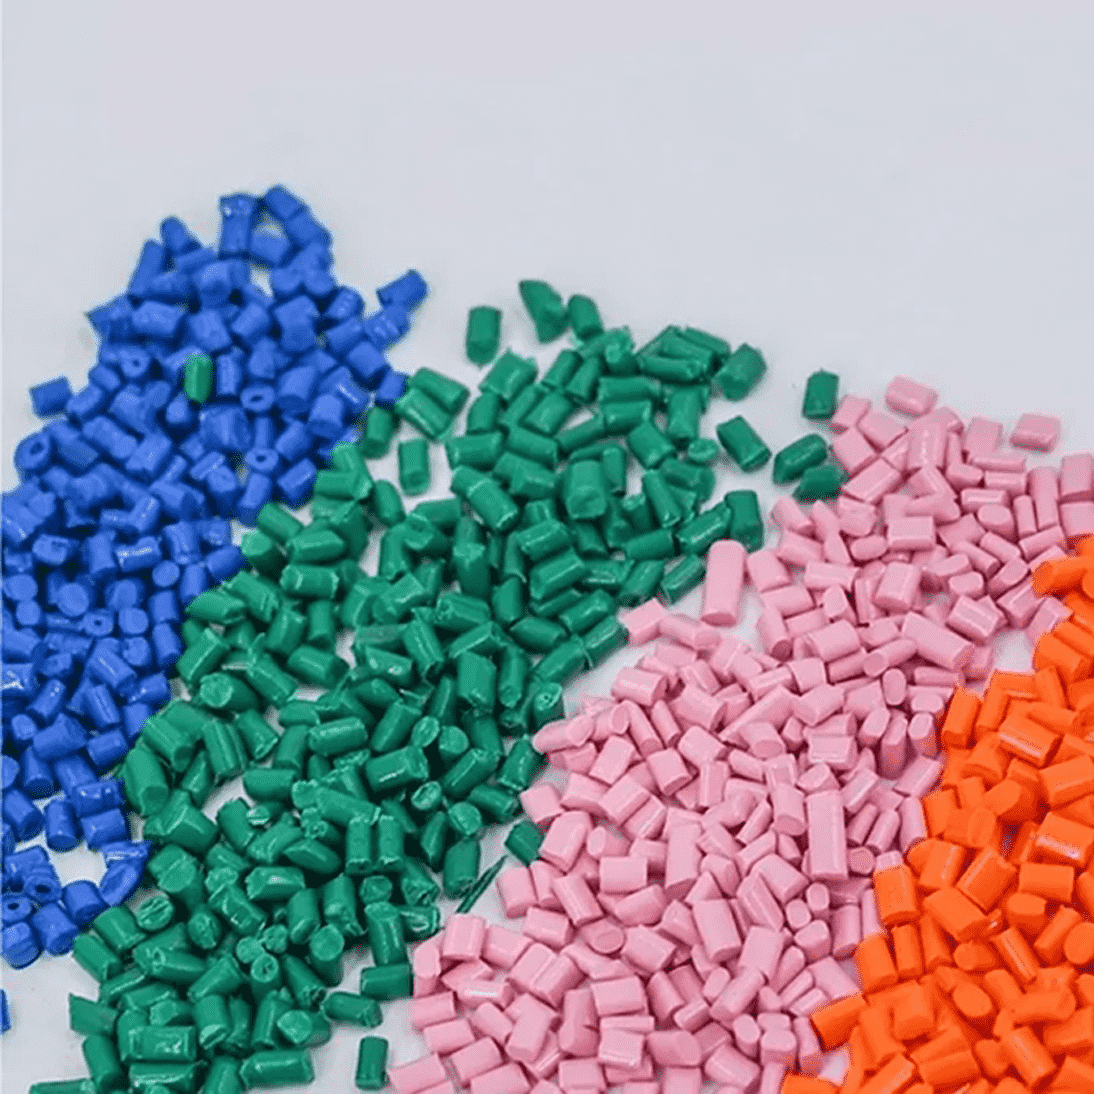 A close up of some different colored plastic granules